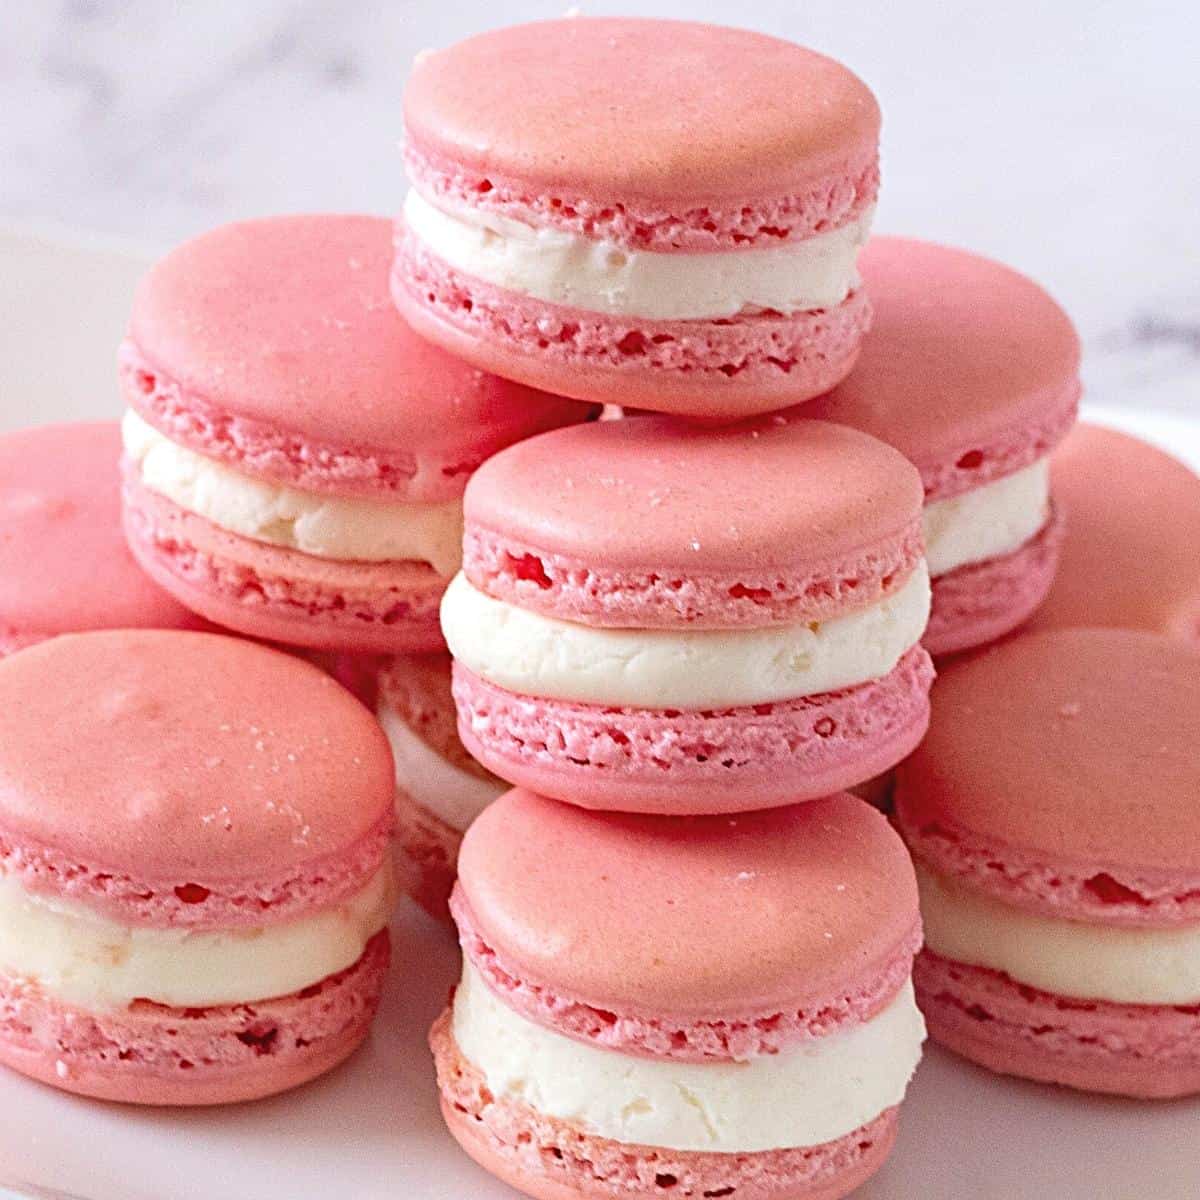 A stack of Pink colored French Macarons.